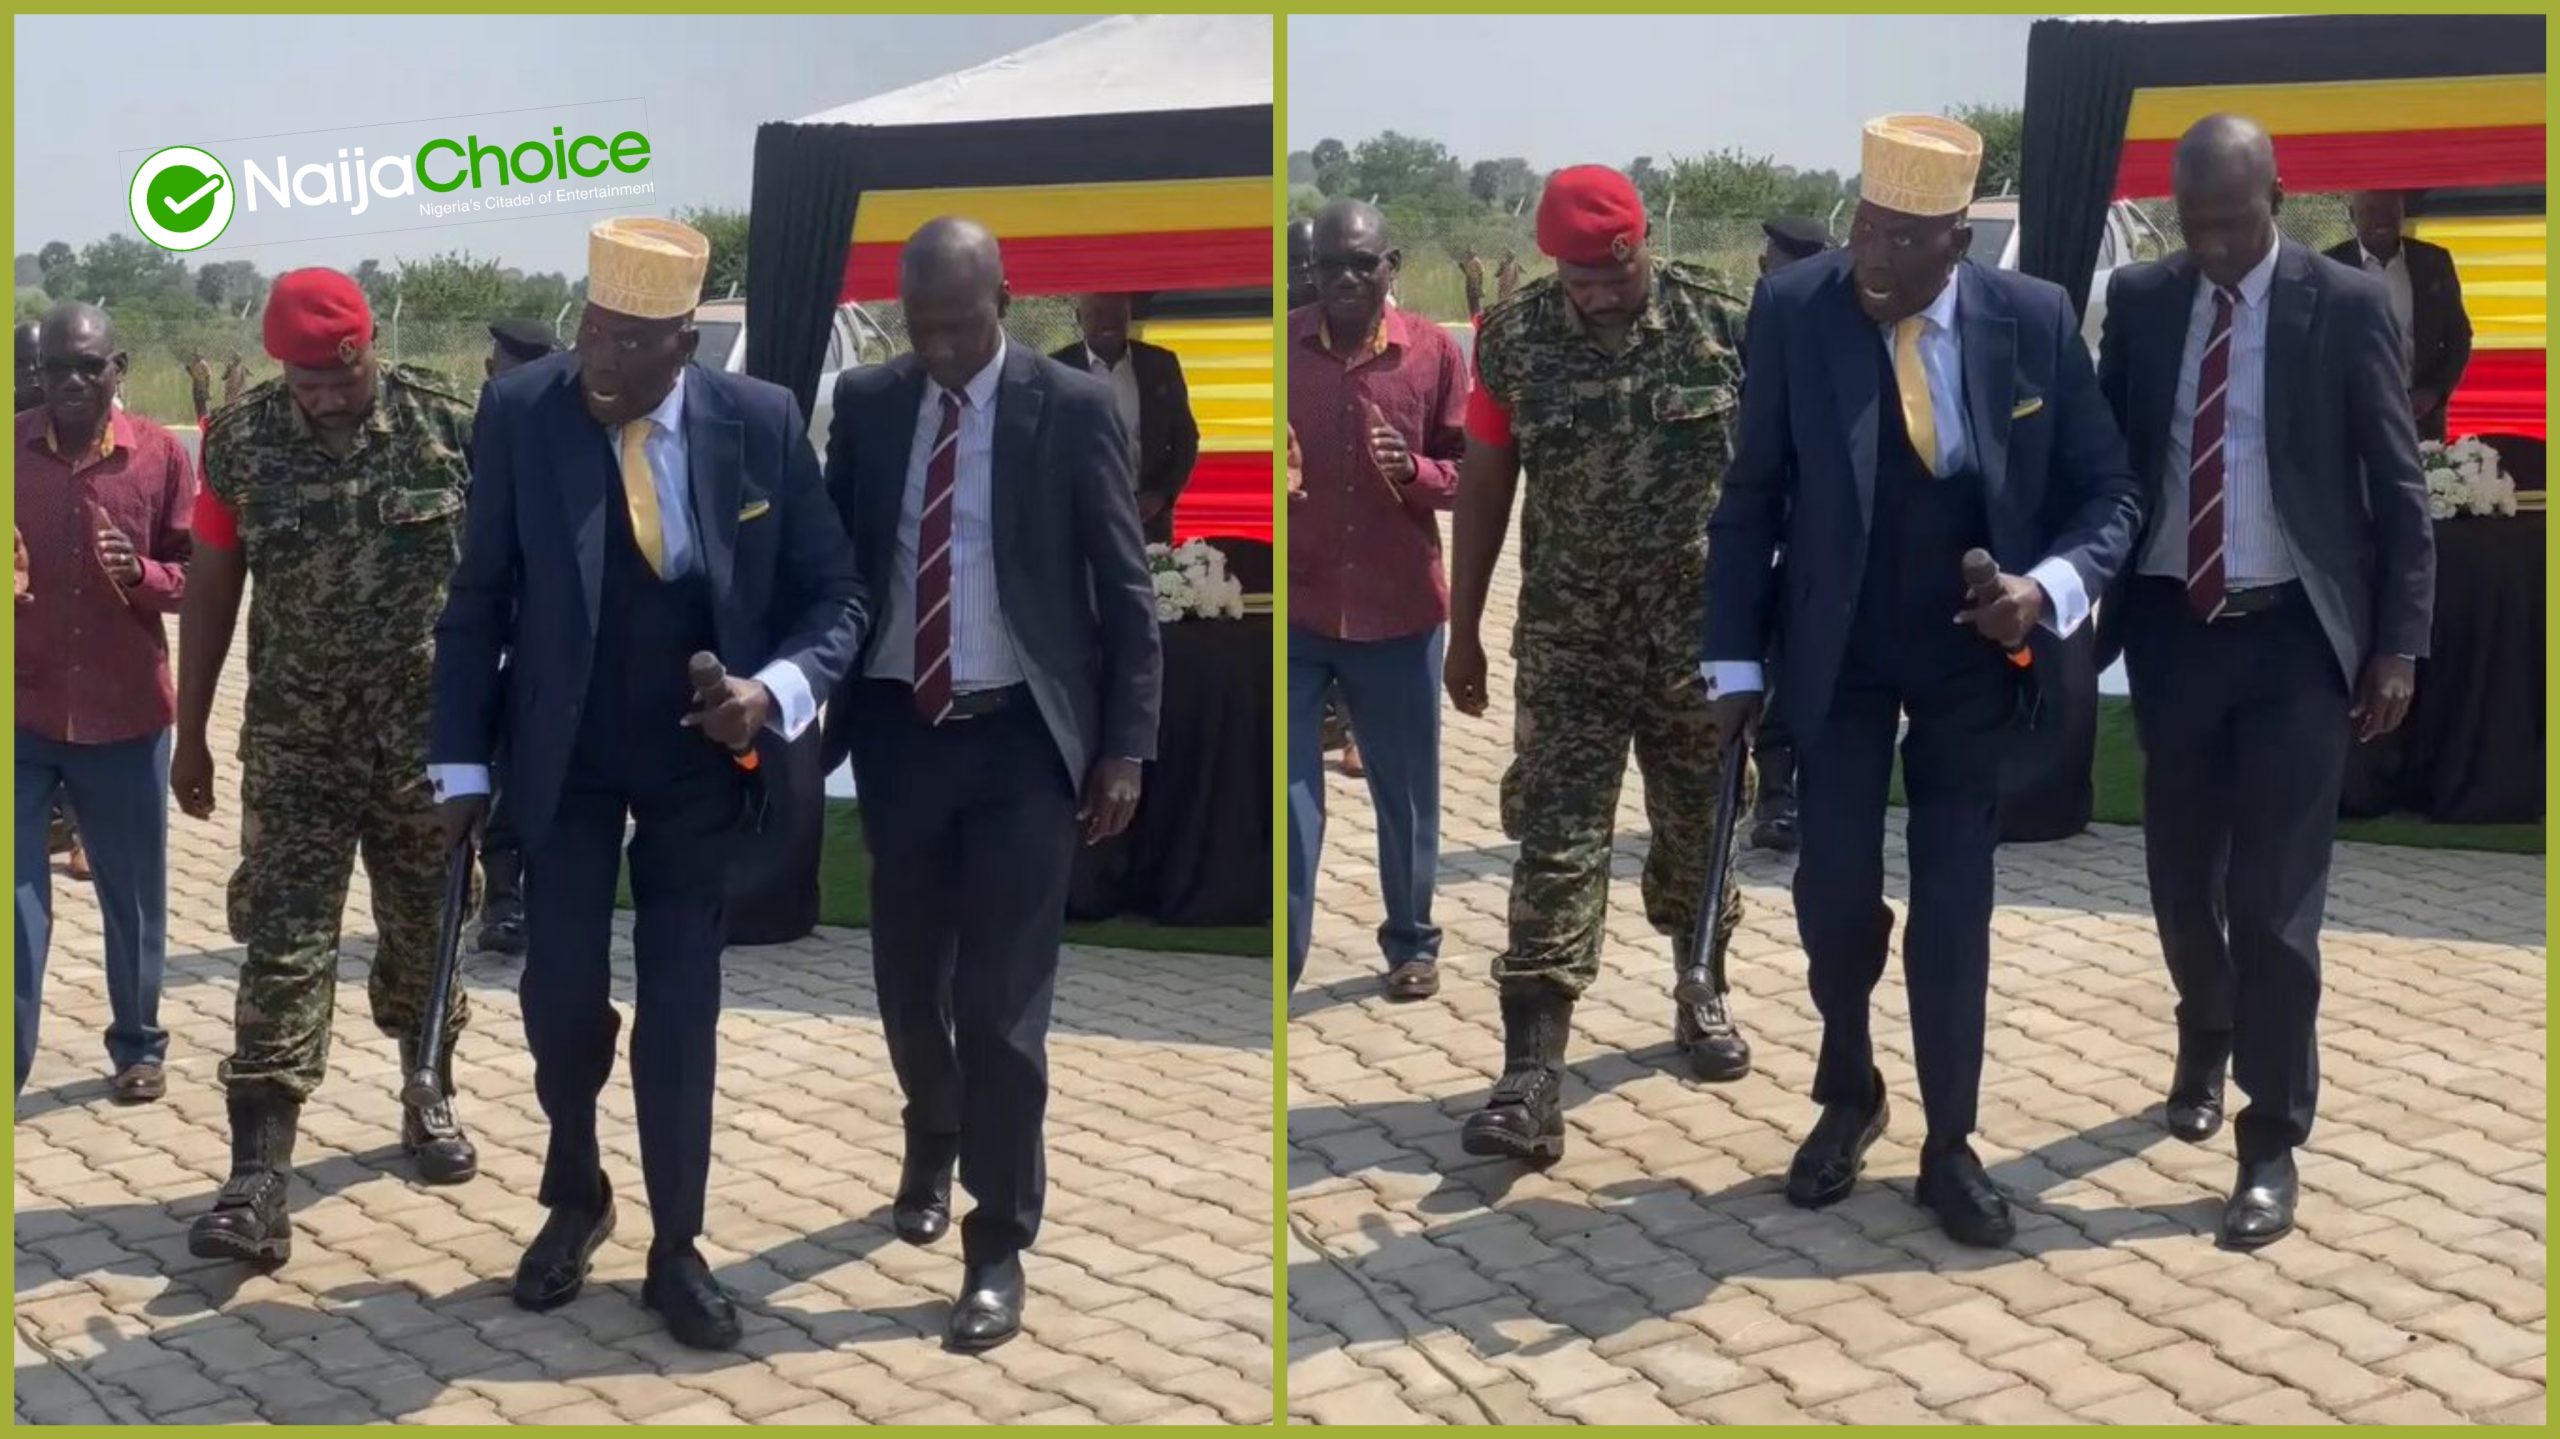 85-Year-Old Ugandan Deputy Prime Minister Shows Dance Moves, To Contest Again (Video)